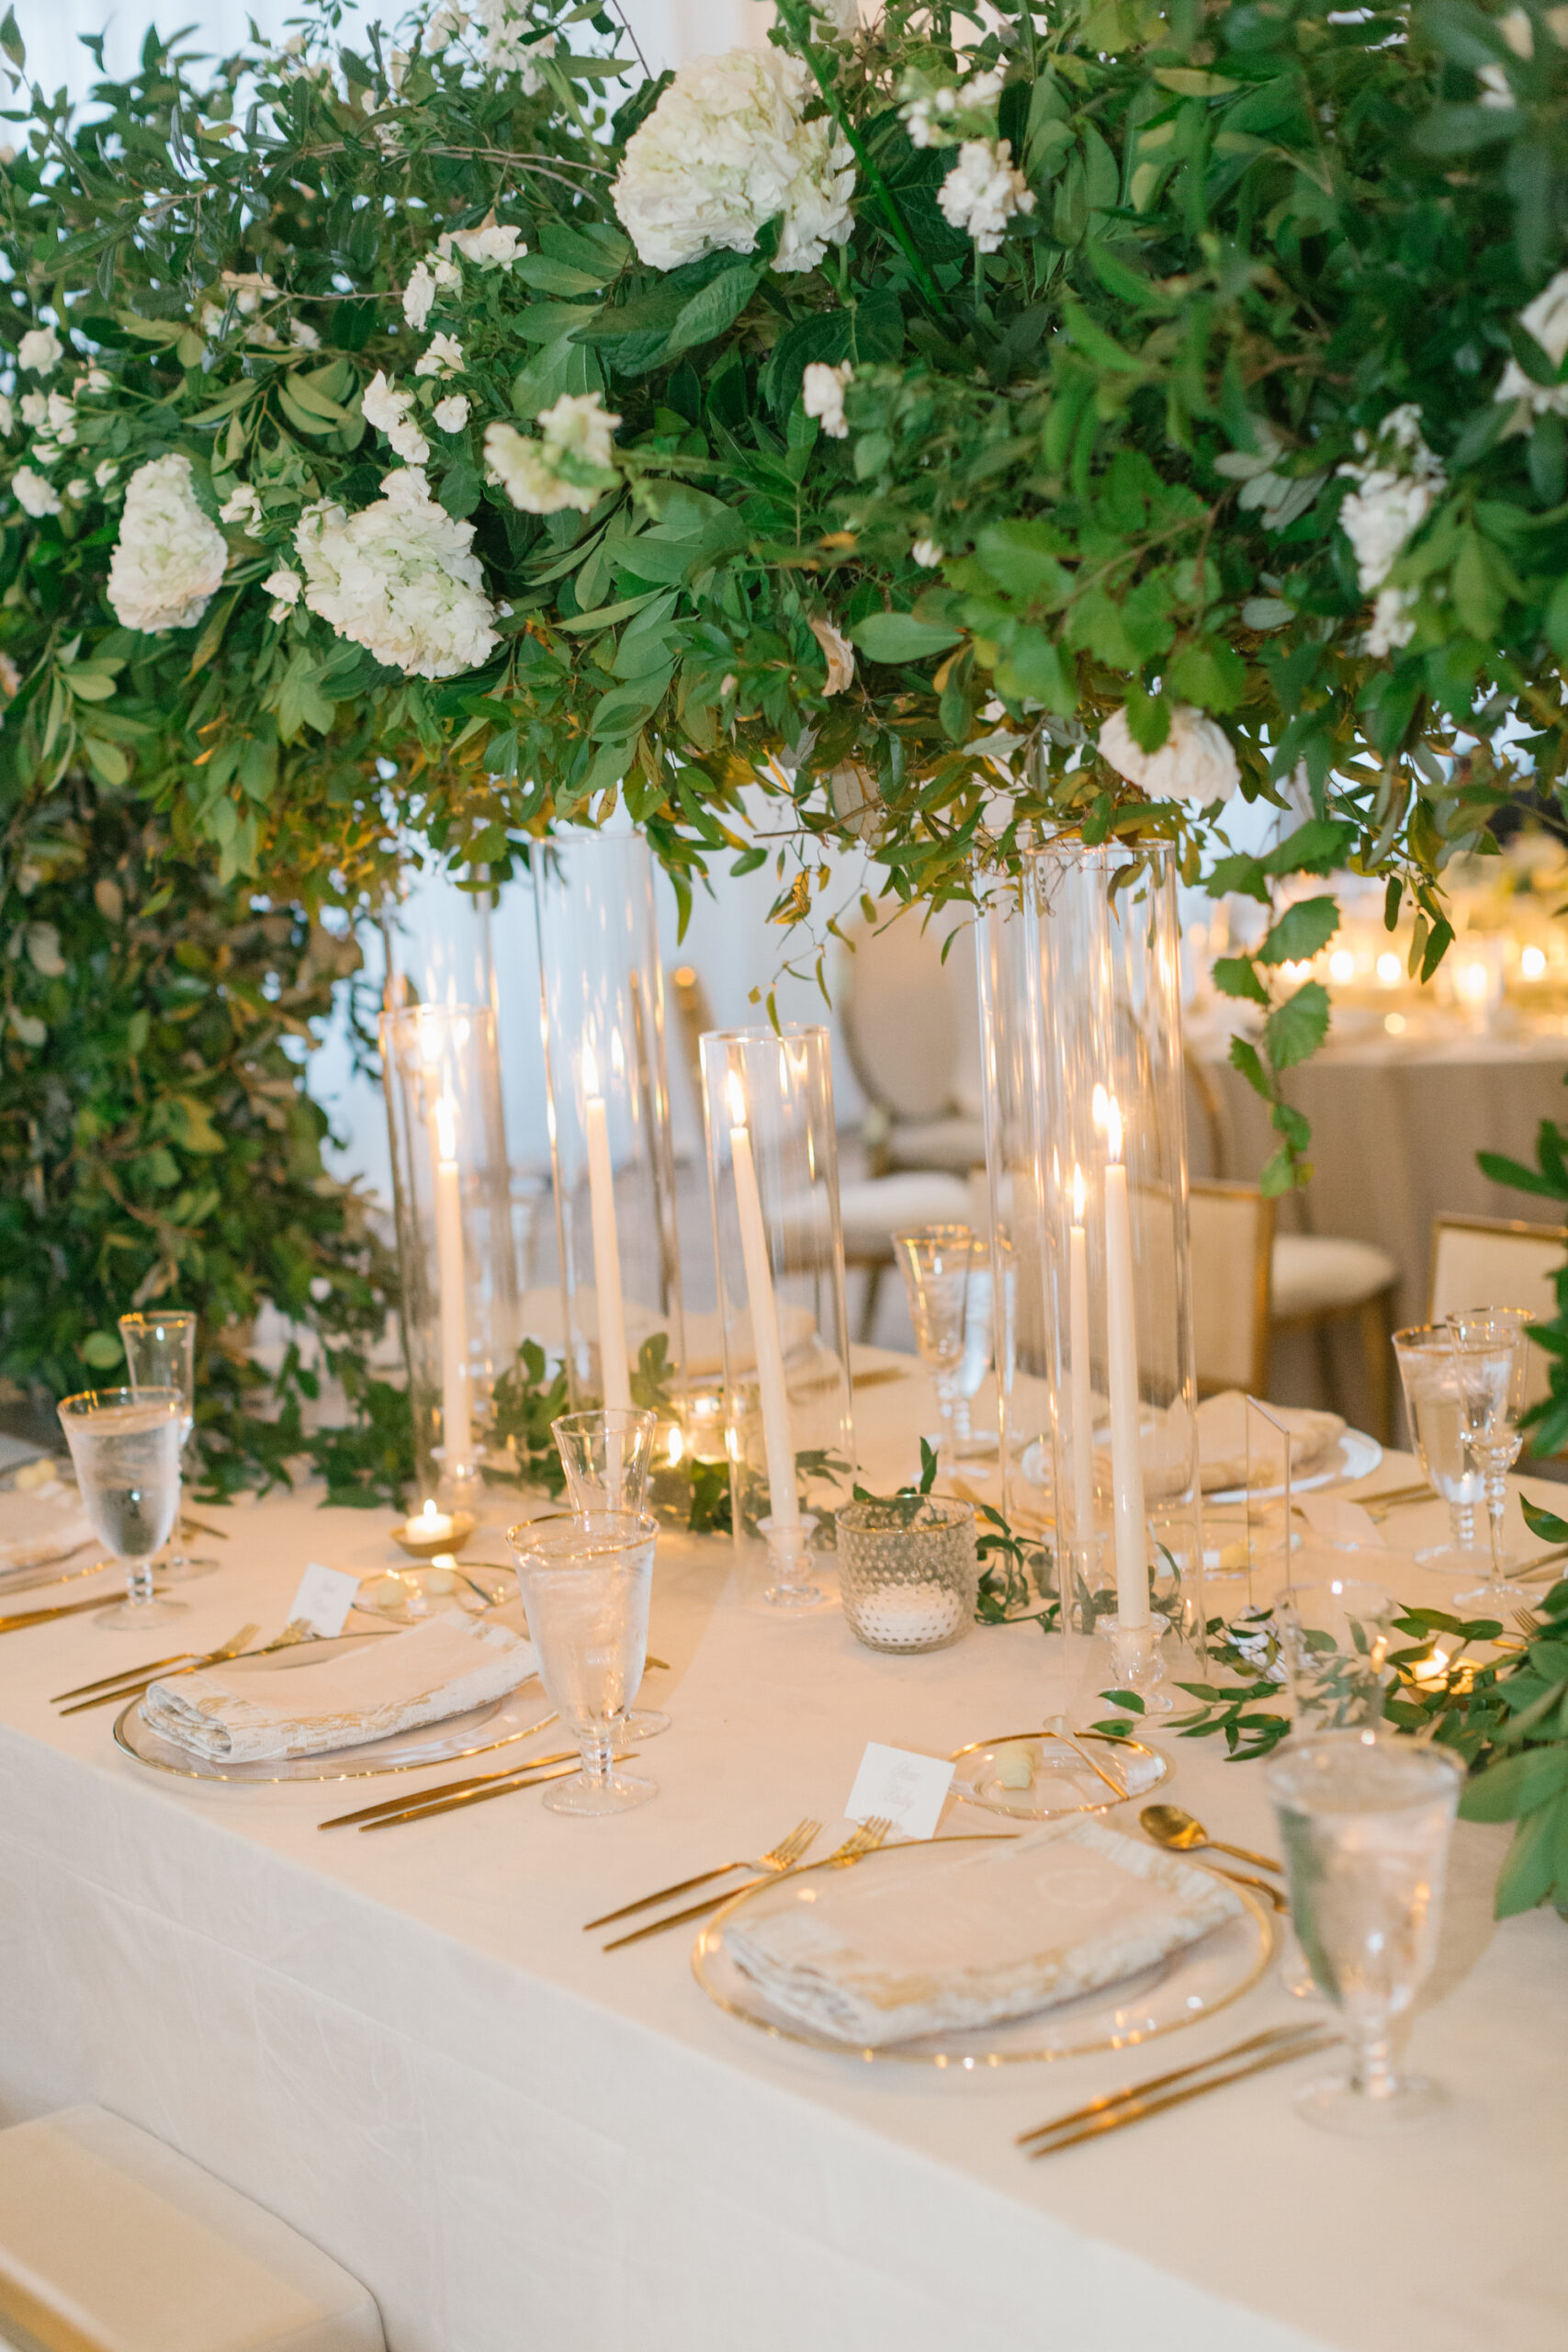 Luxurious Ballroom Wedding Reception Inspiration | Champagne Linen | Gold Rimmed Charger with Gold Flatware | Tabletop Arch White Flowers with Greenery Centerpiece Ideas | Hurricane Taper Candle Holders